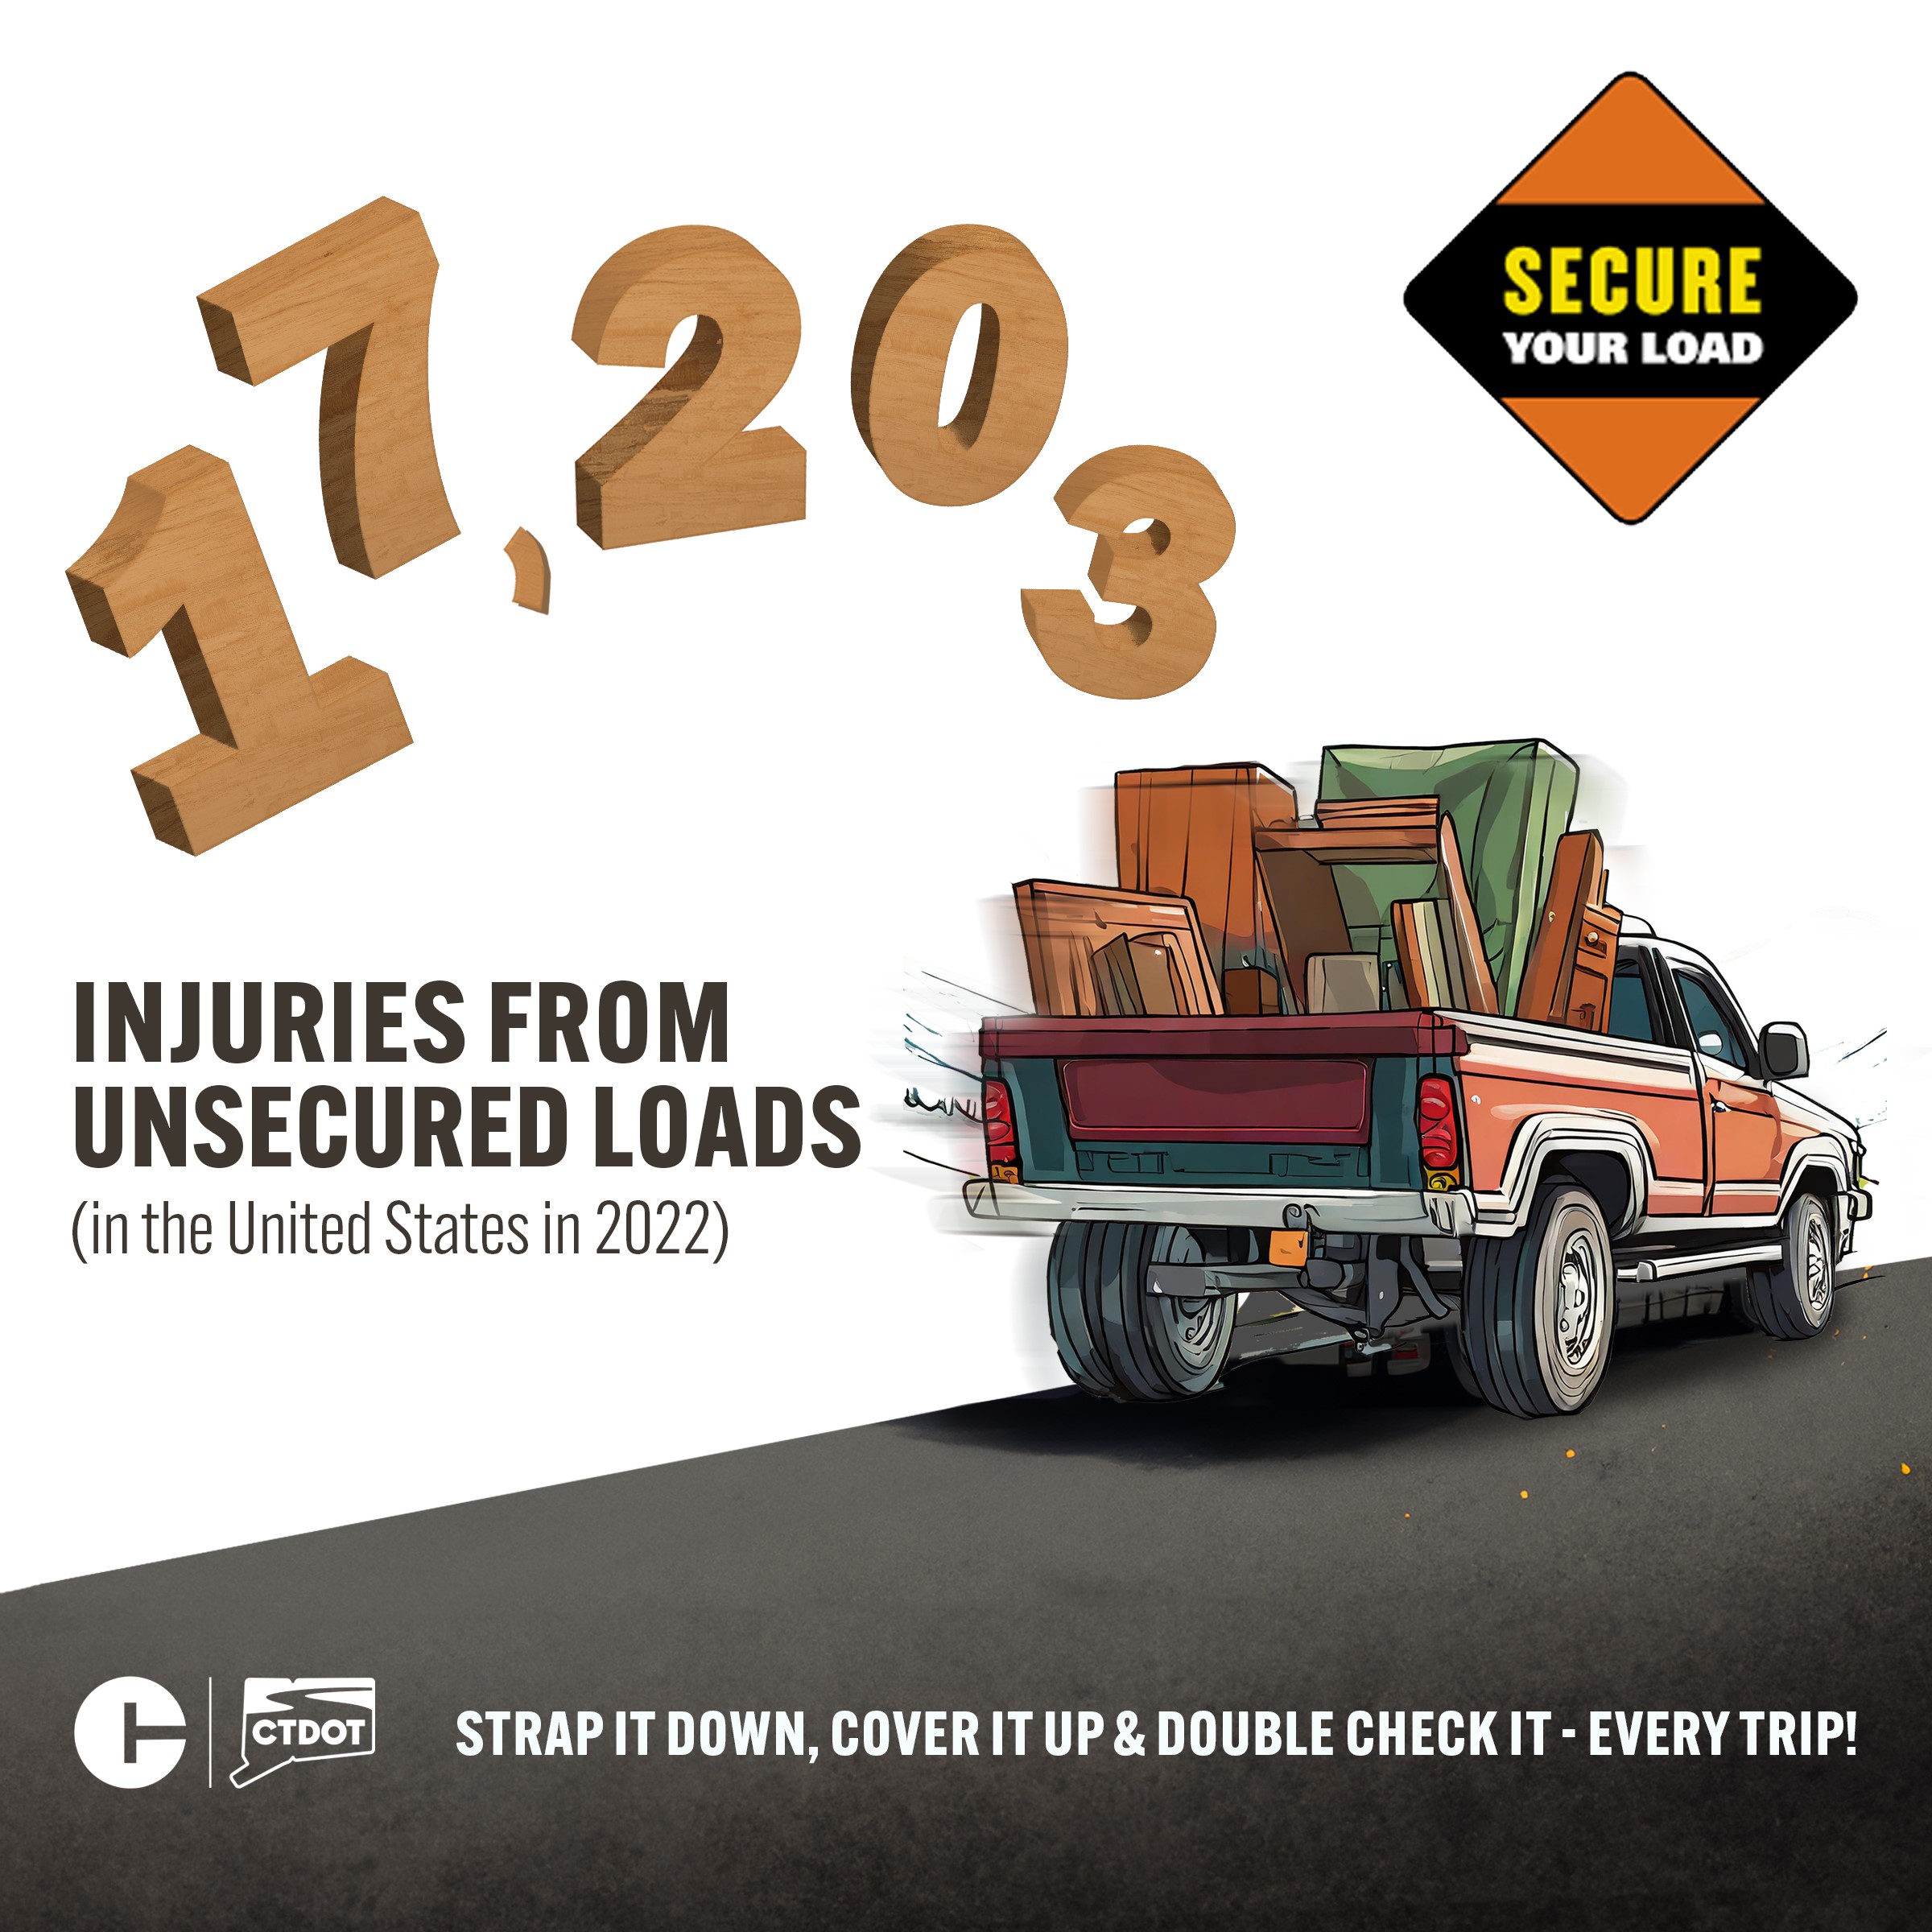 17,203 injuries from unsecured loads occured in the United States in 2022. Strap is down, cover it up and double check it- every trip!